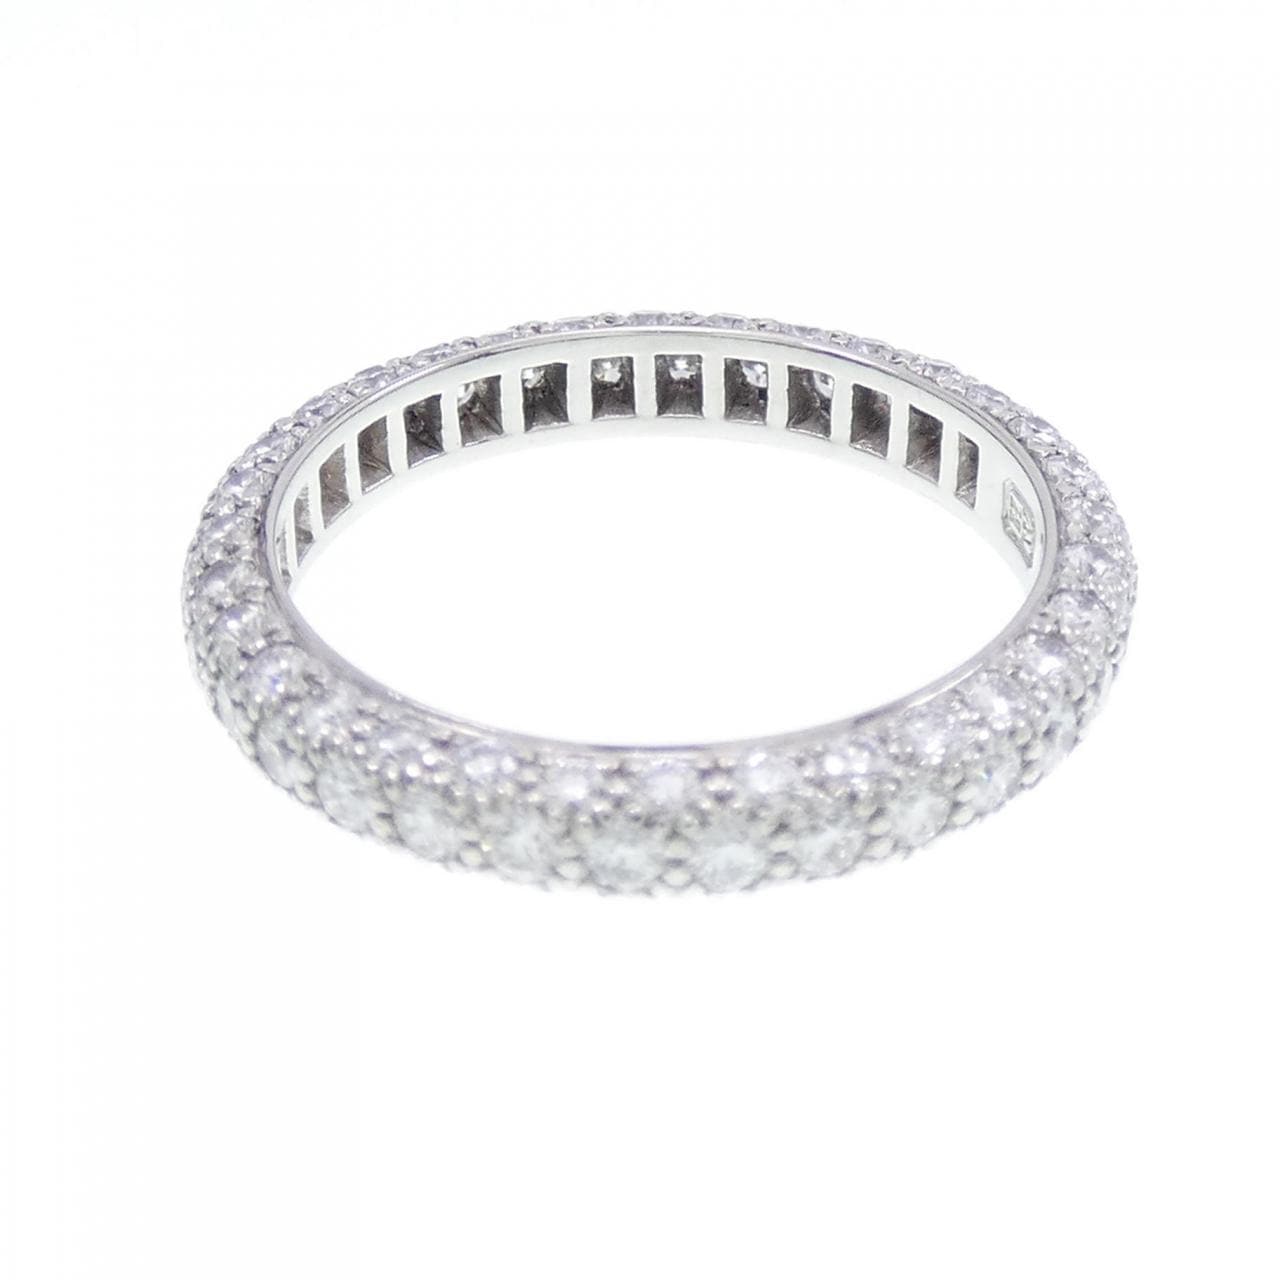 HARRY WINSTON dome pave ring